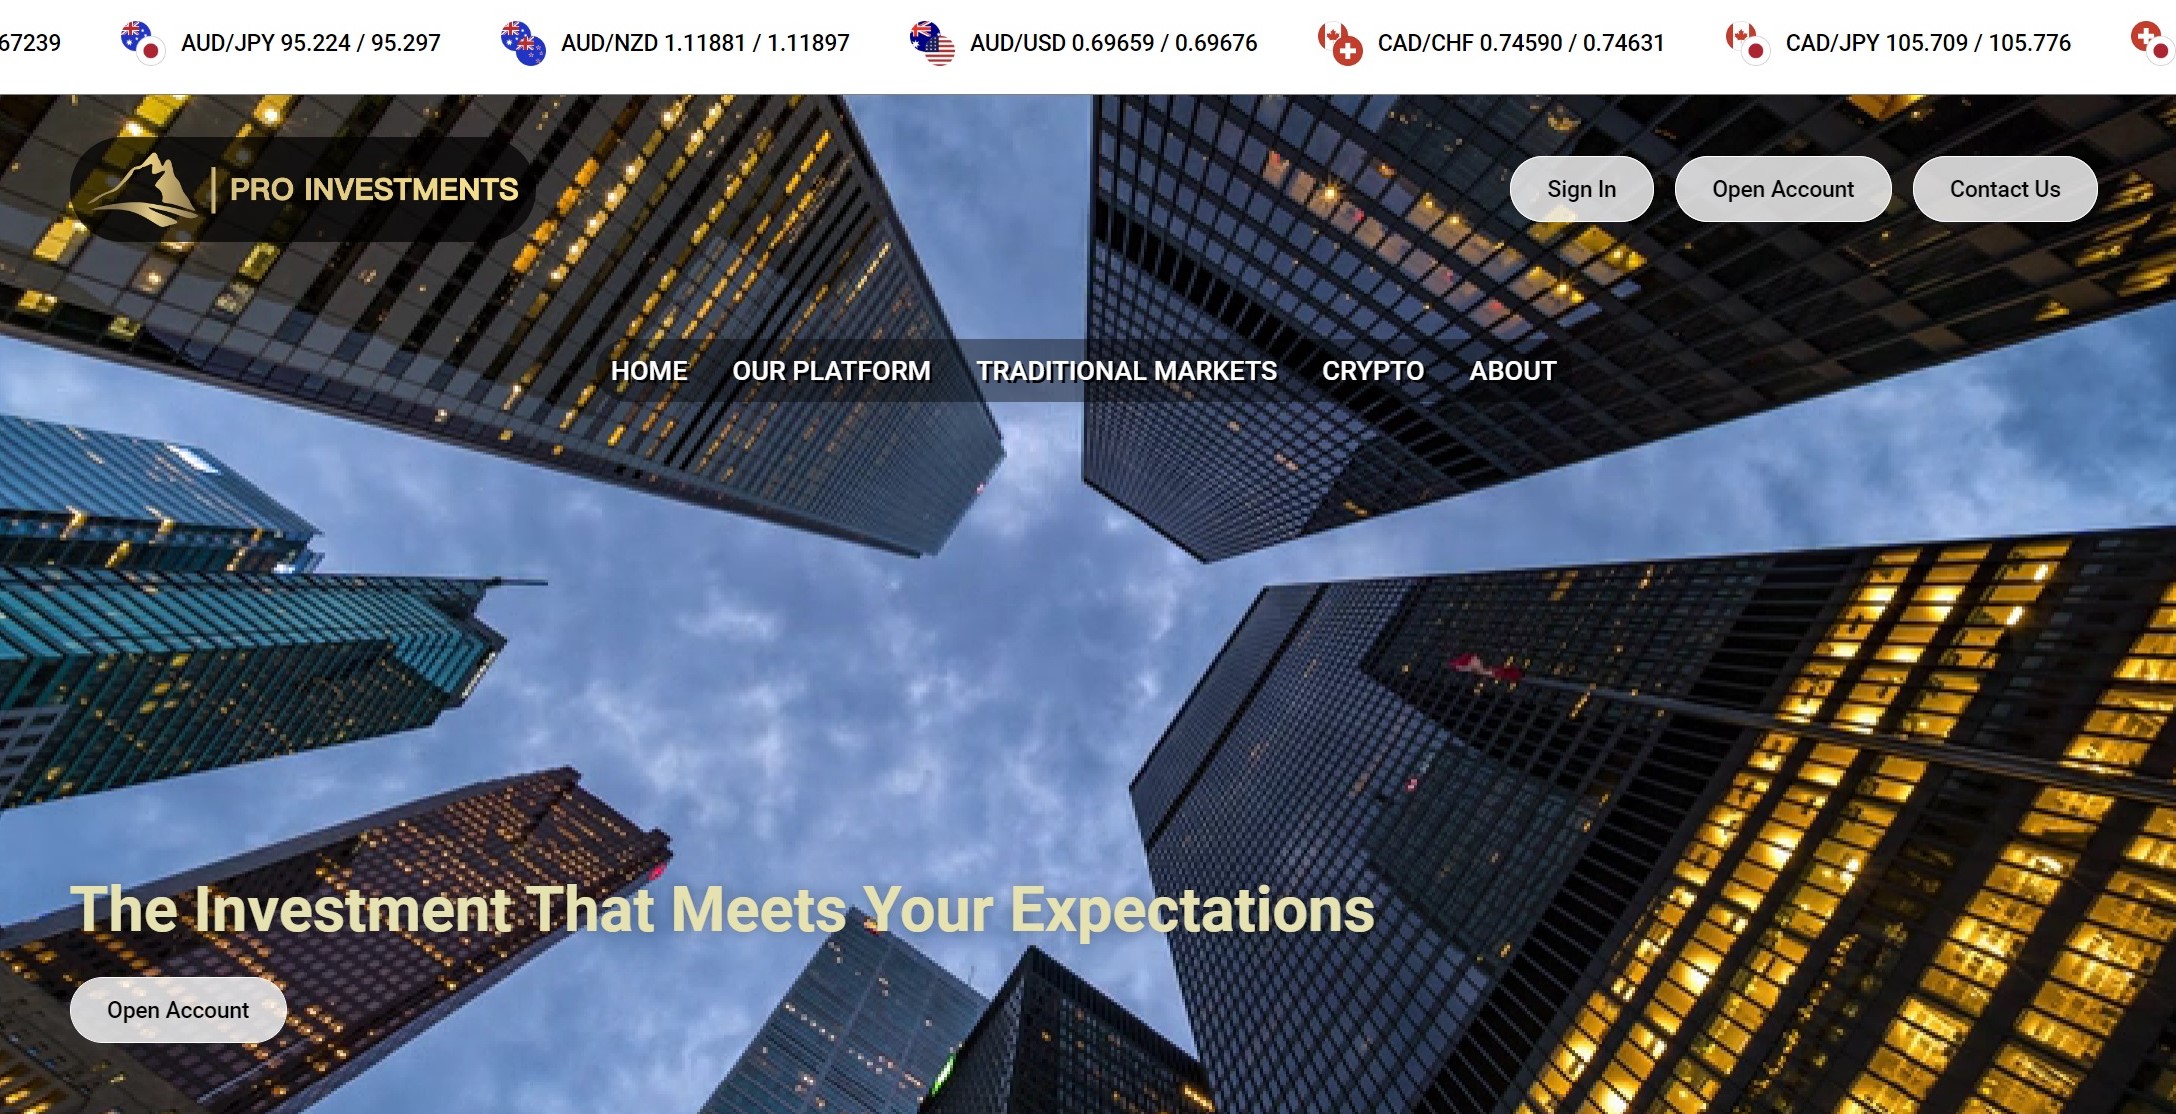 Pro Investments homepage